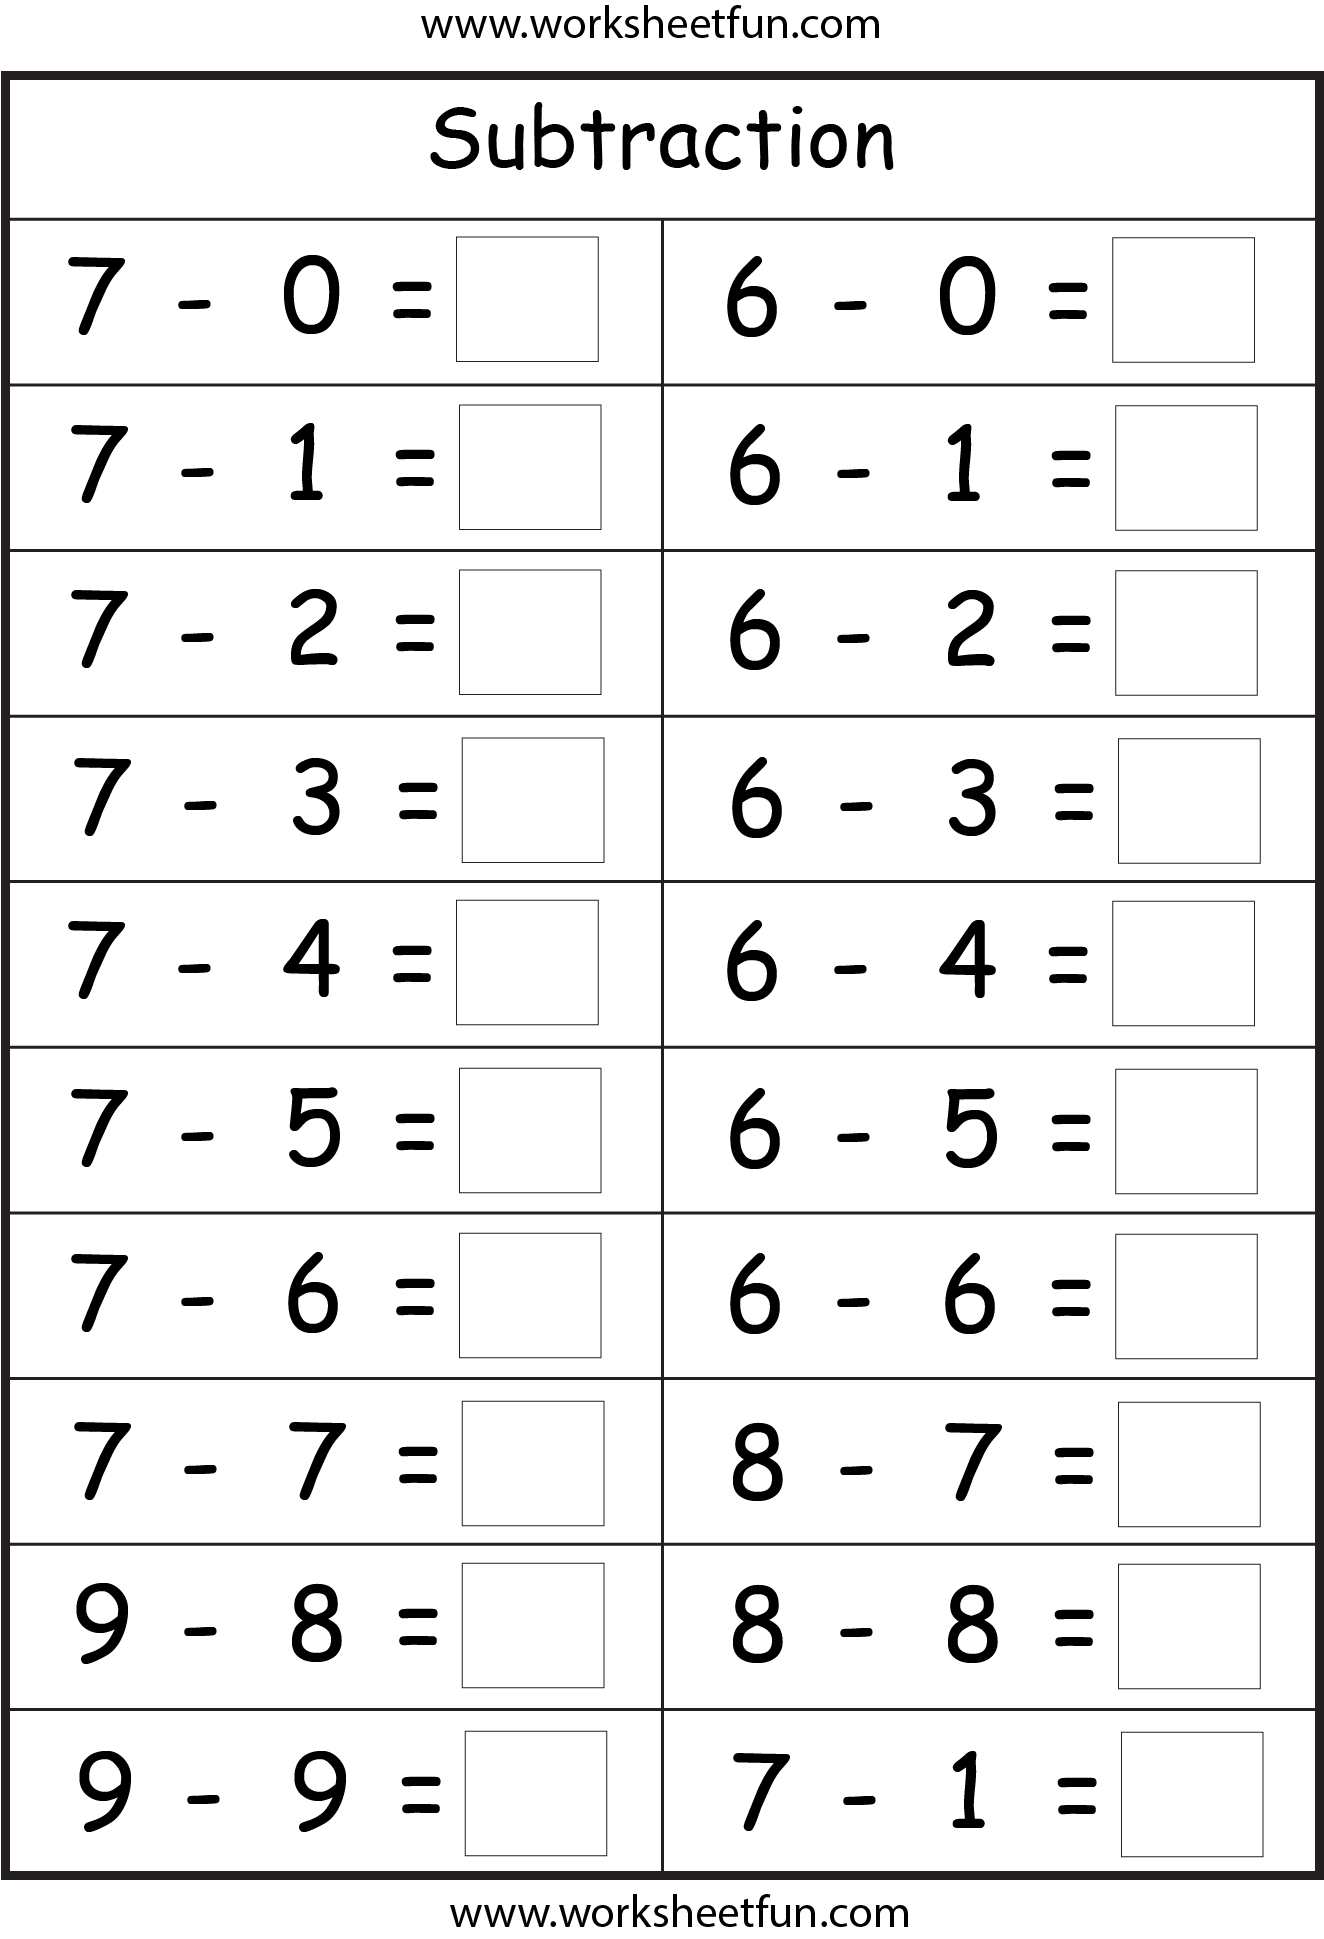 Printable Subtraction Worksheets Free